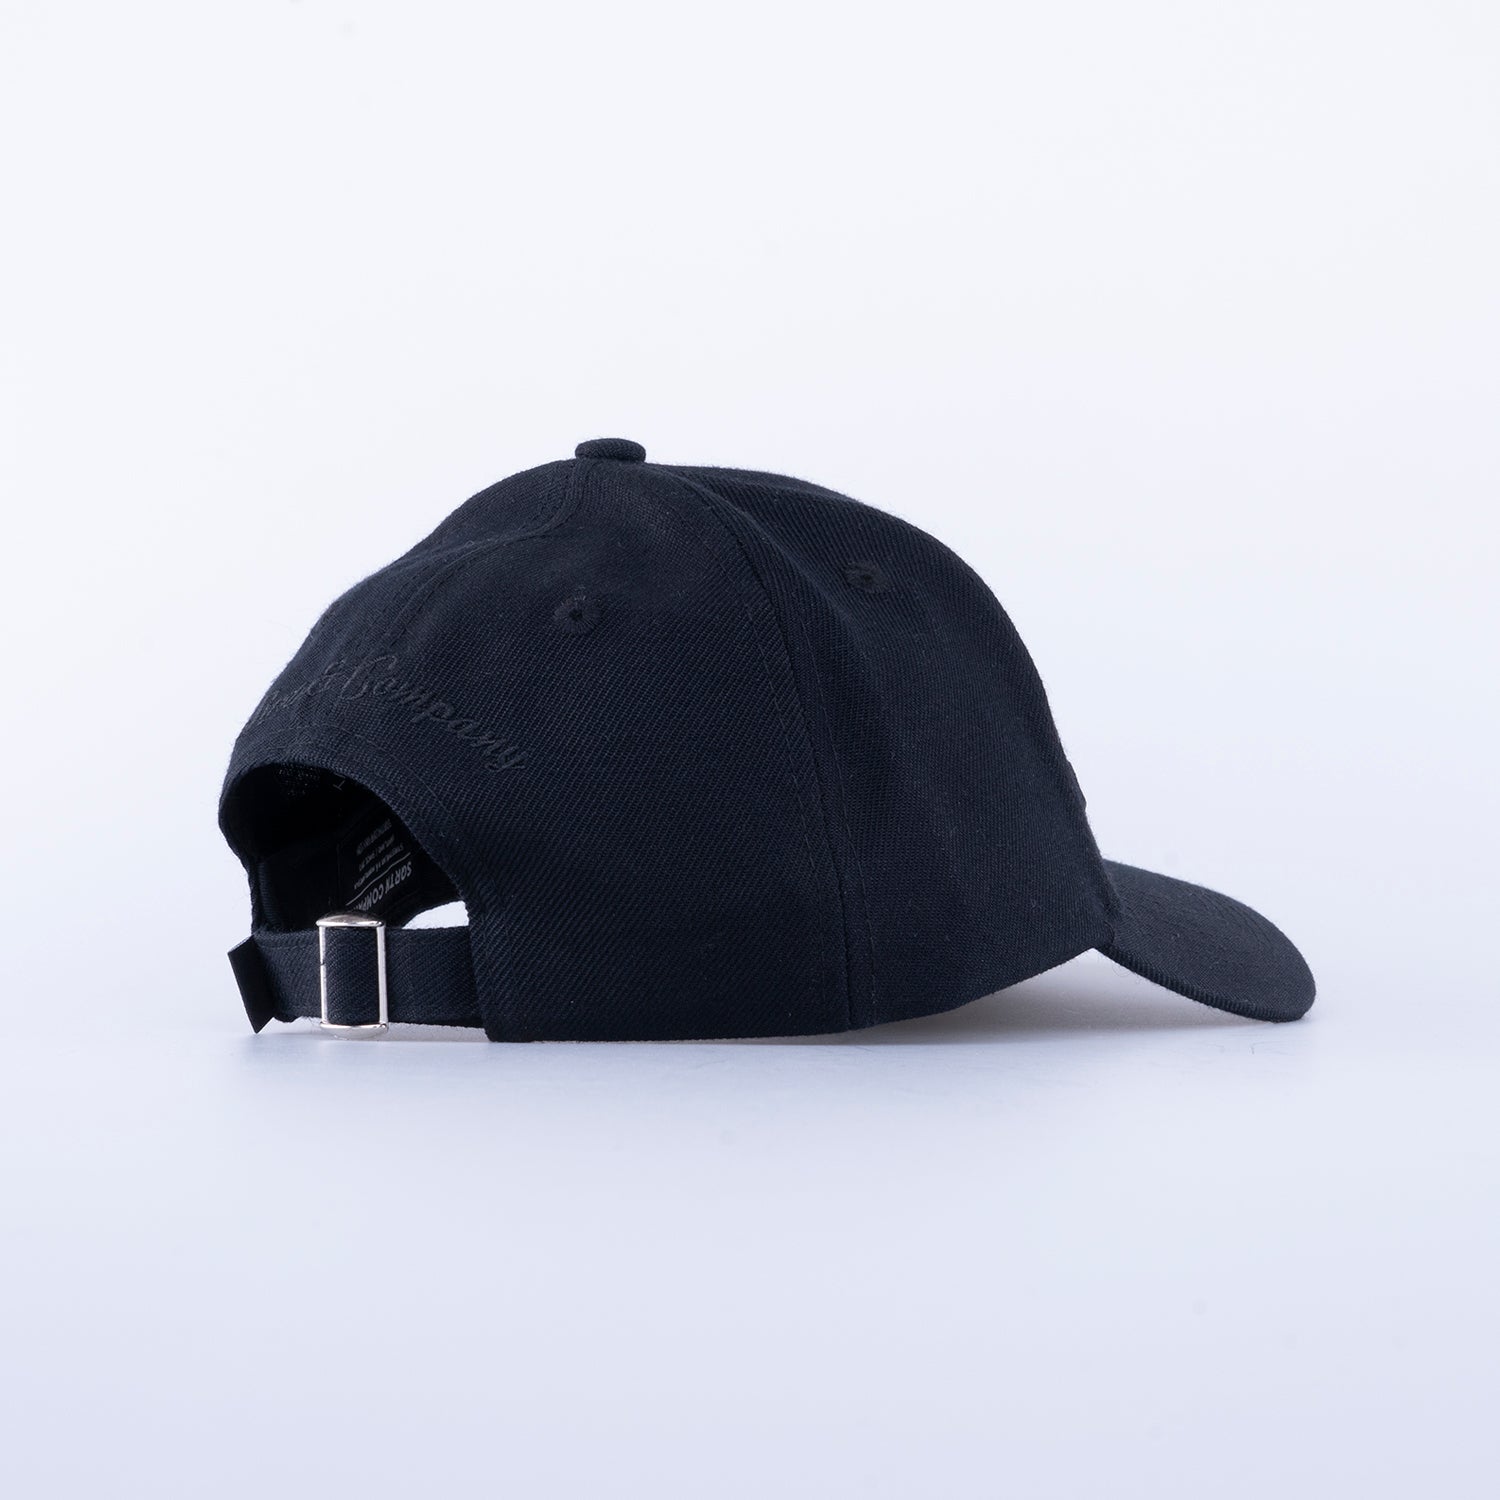 GREAT NORRLAND CAP - HOOKED ALL BLACK